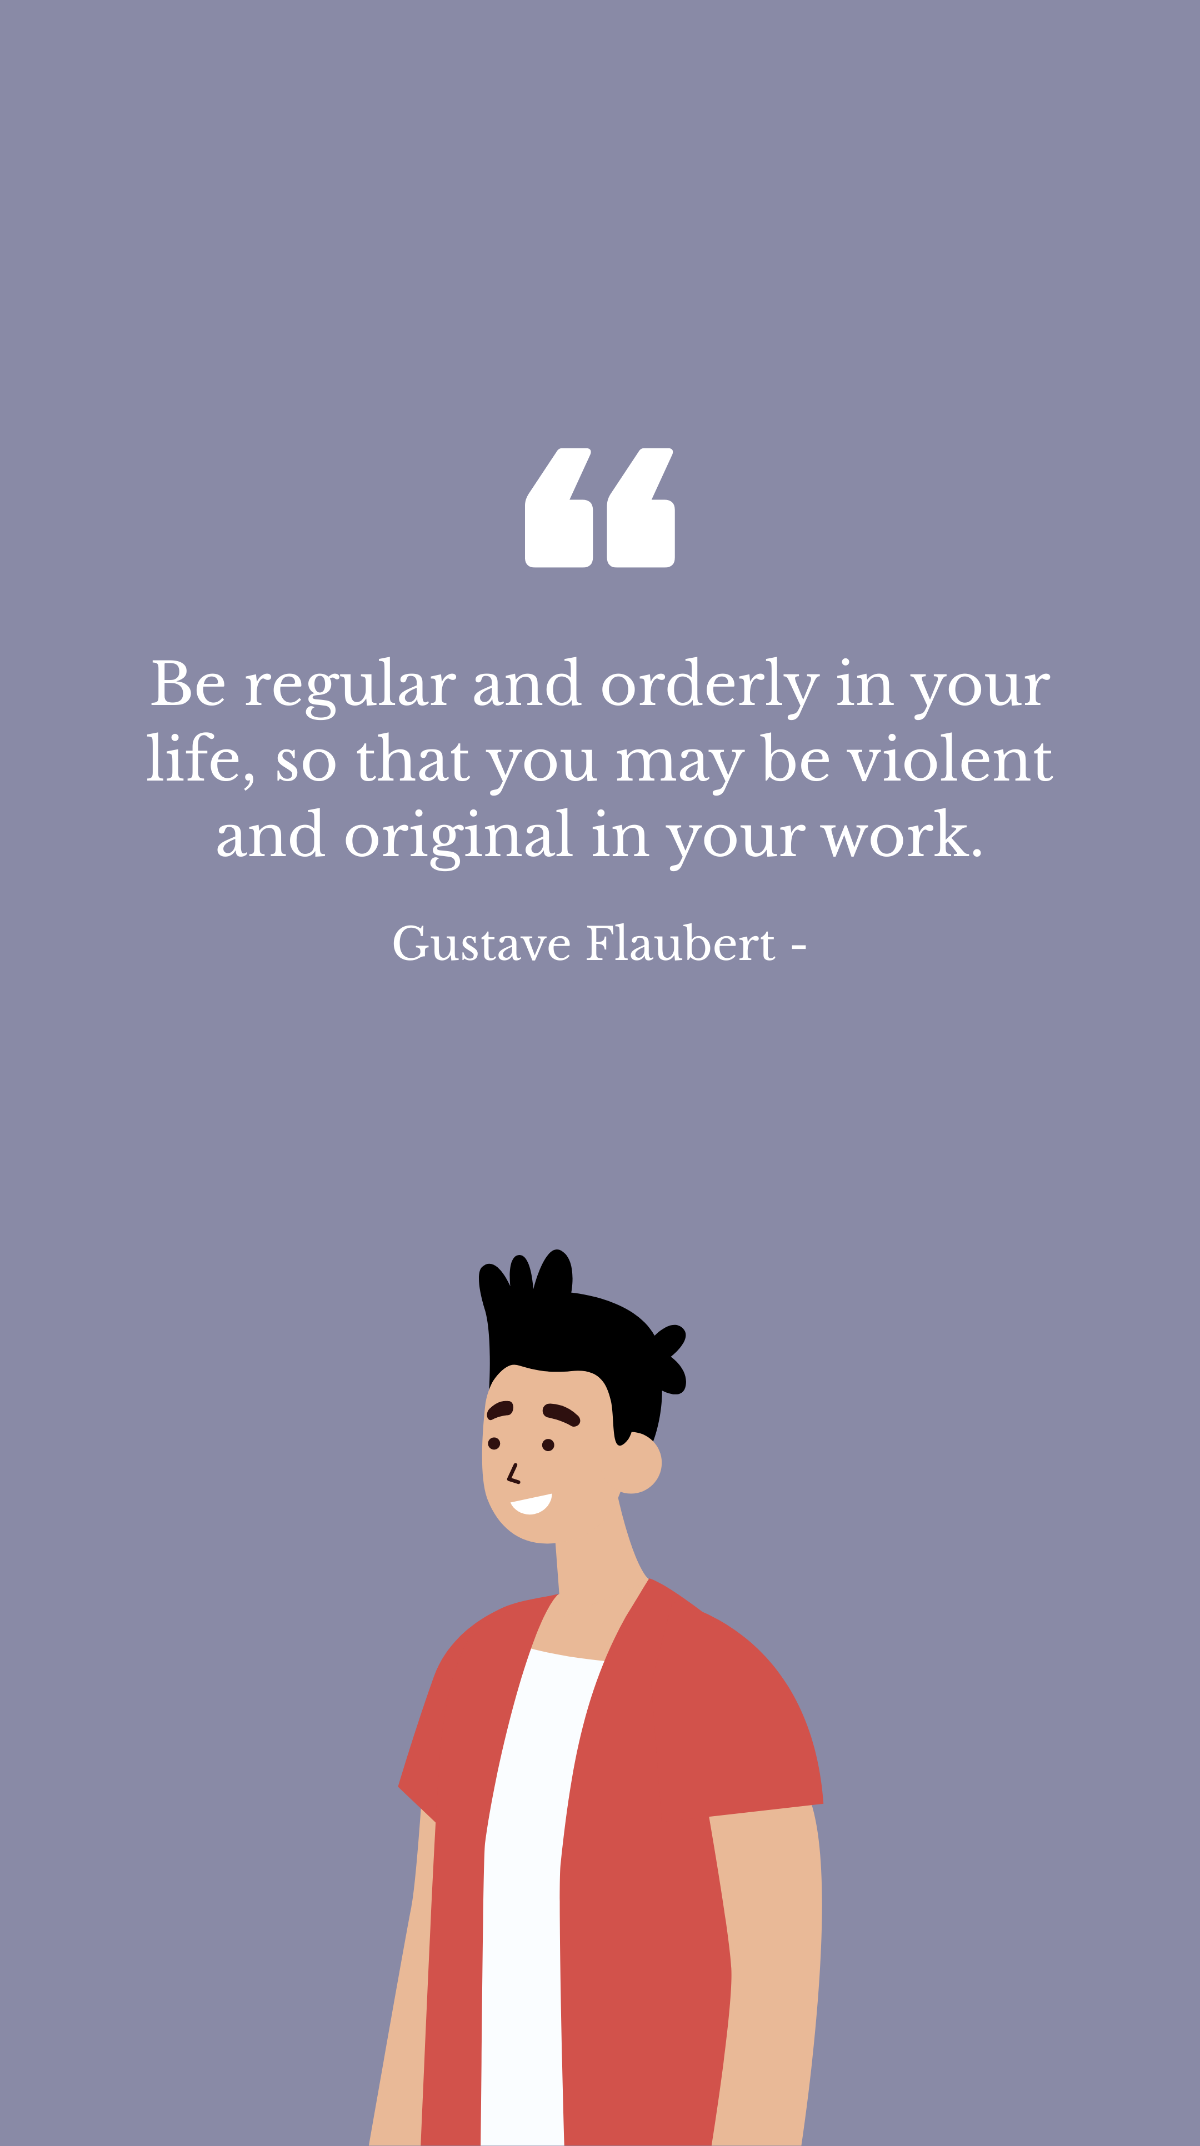 Gustave Flaubert - Be regular and orderly in your life, so that you may be violent and original in your work. Template